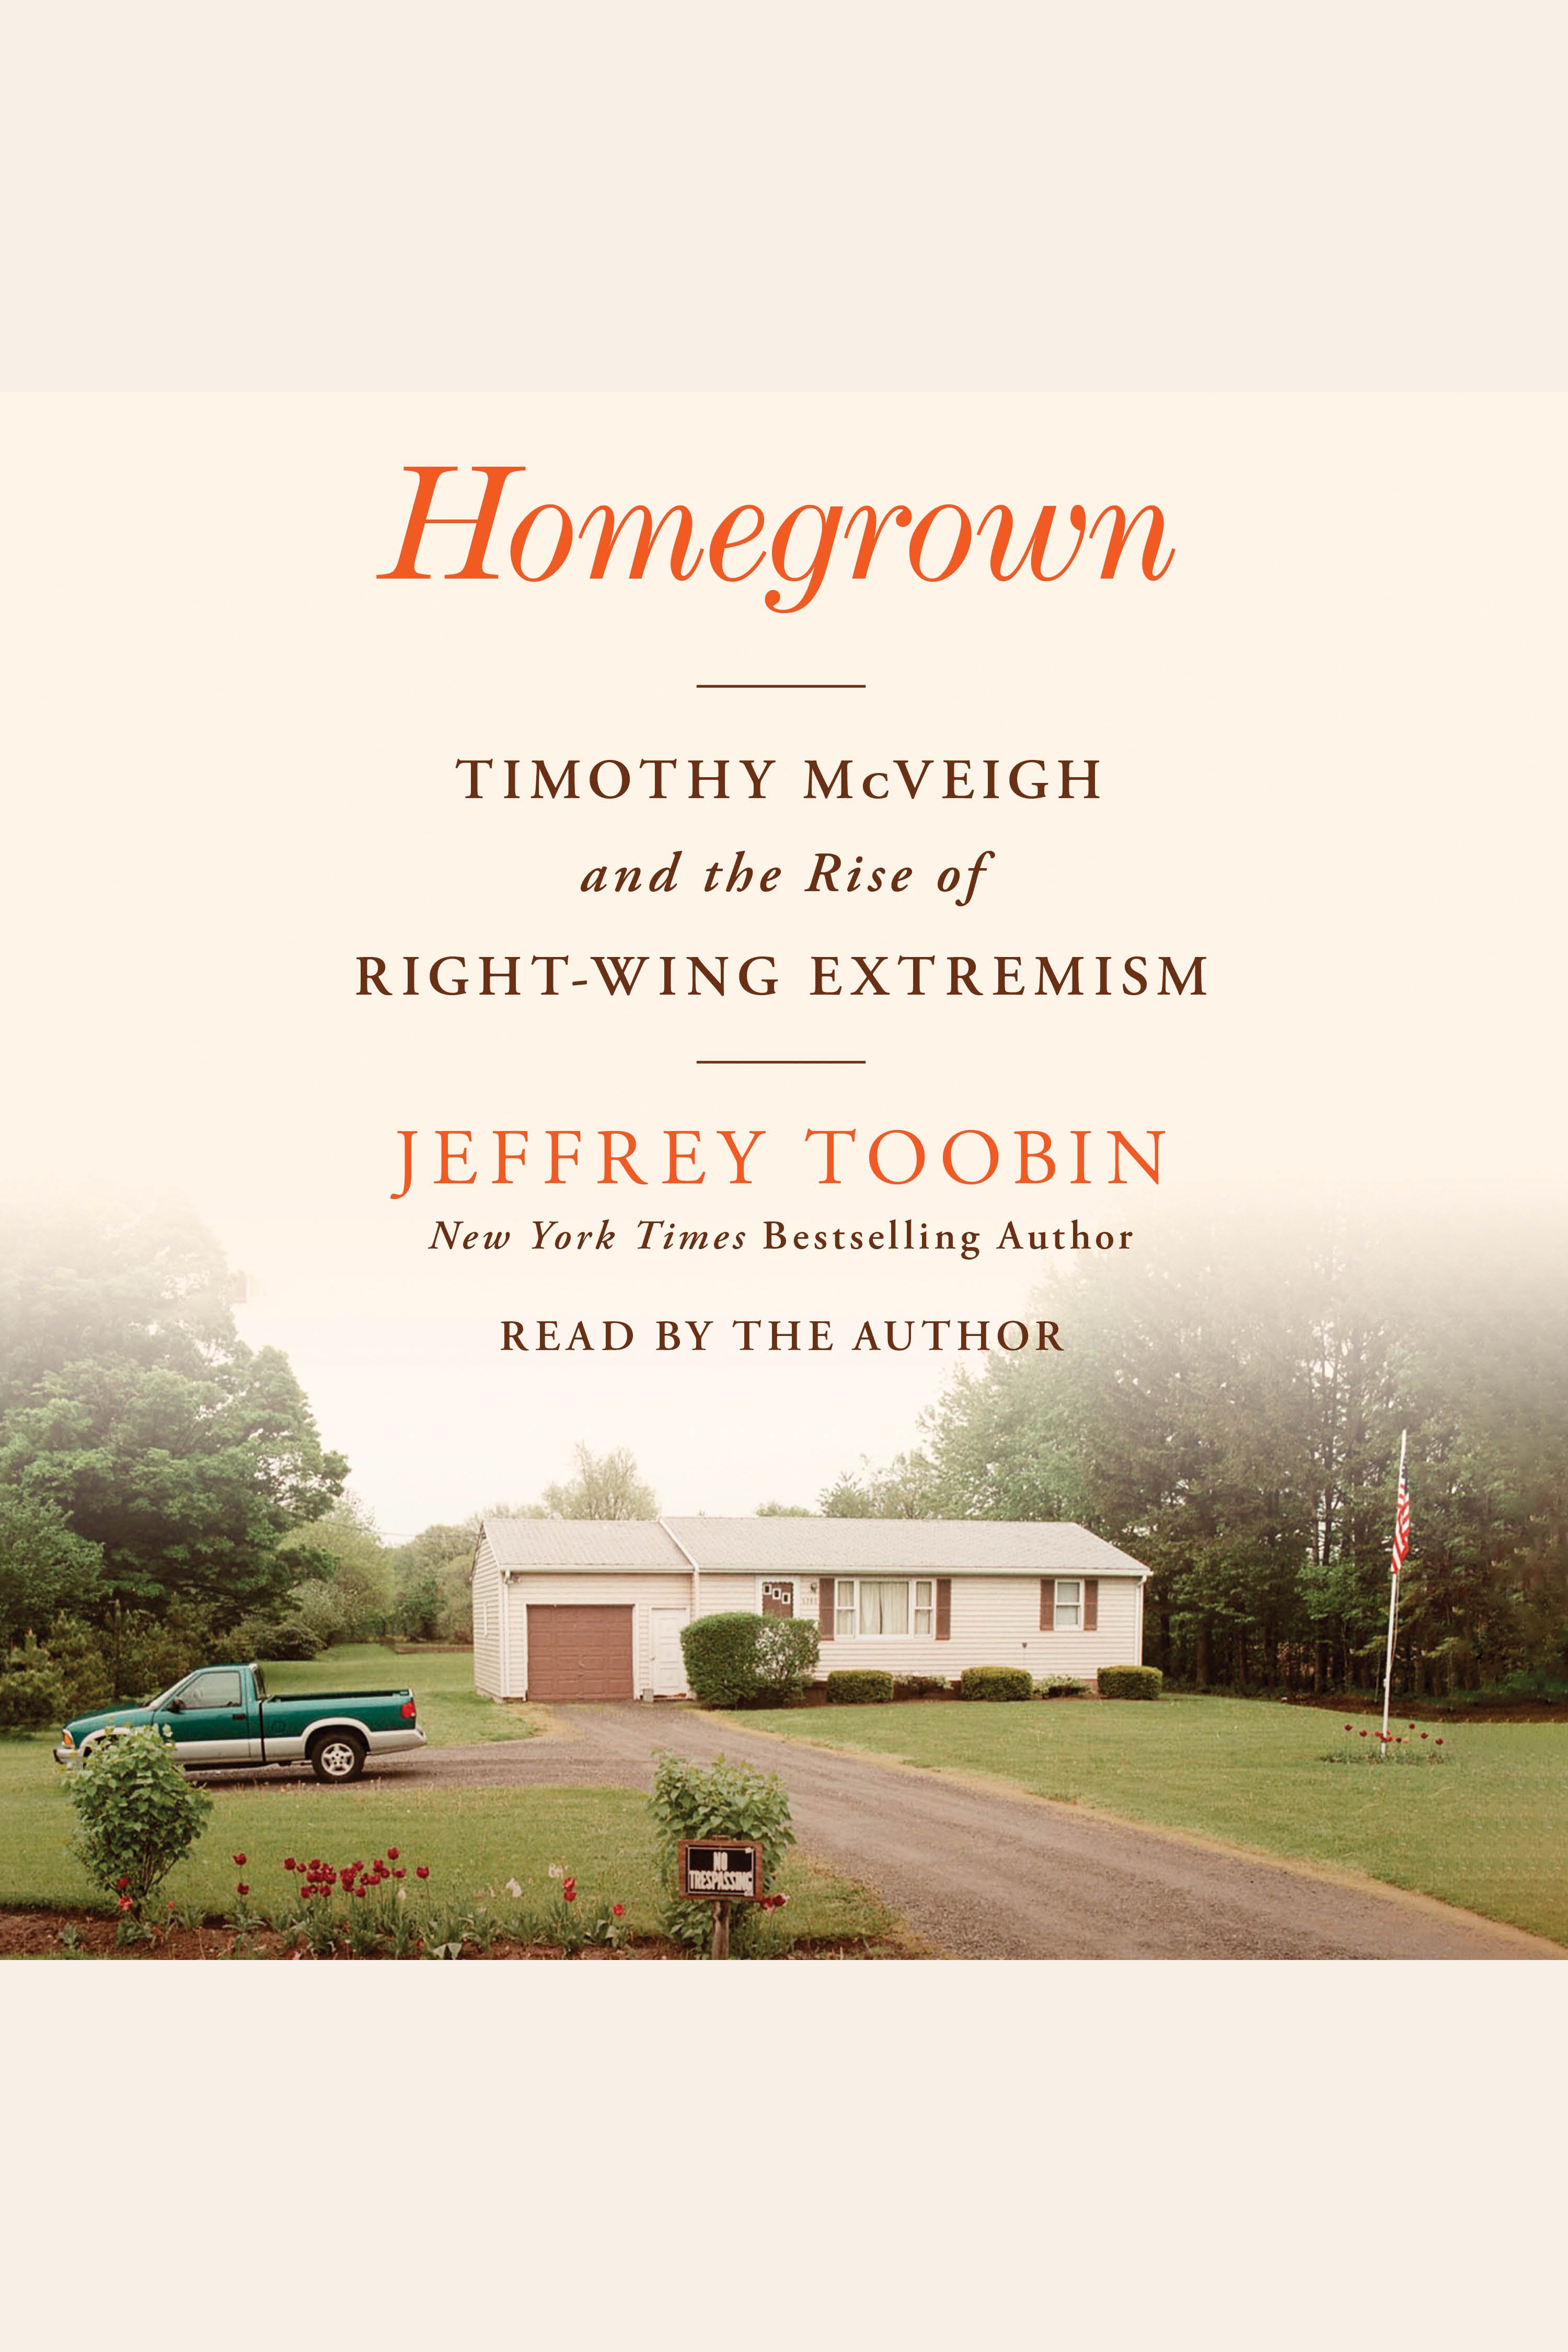 Homegrown Timothy McVeigh and the Rise of Right-Wing Extremism cover image